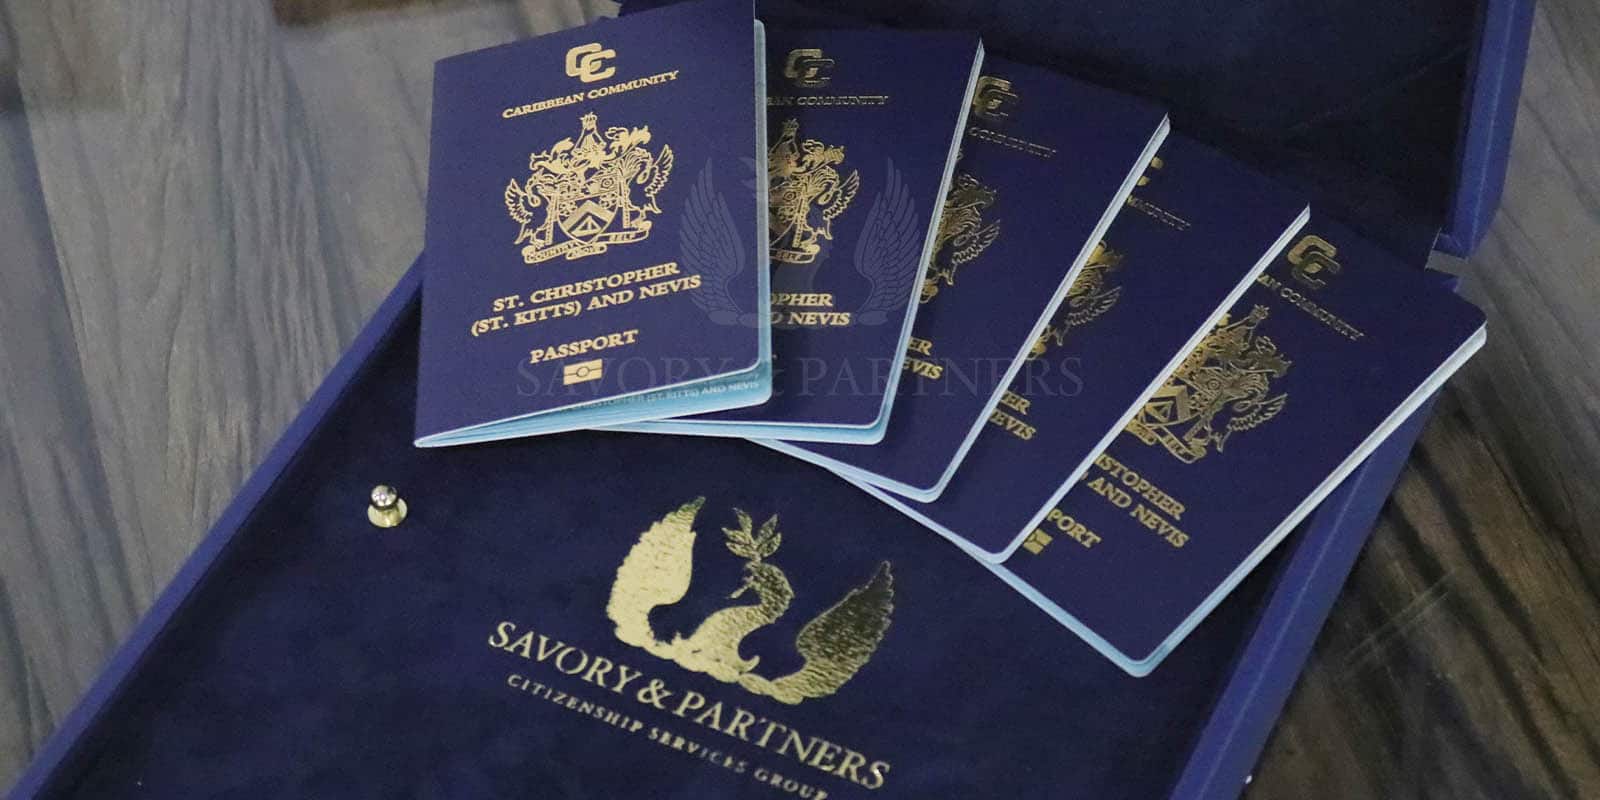 Who Can Get Citizenship and Passport for St Kitts and Nevis? - Second  Citizenship by Investment, Second Passport Programs - Savory & Partners